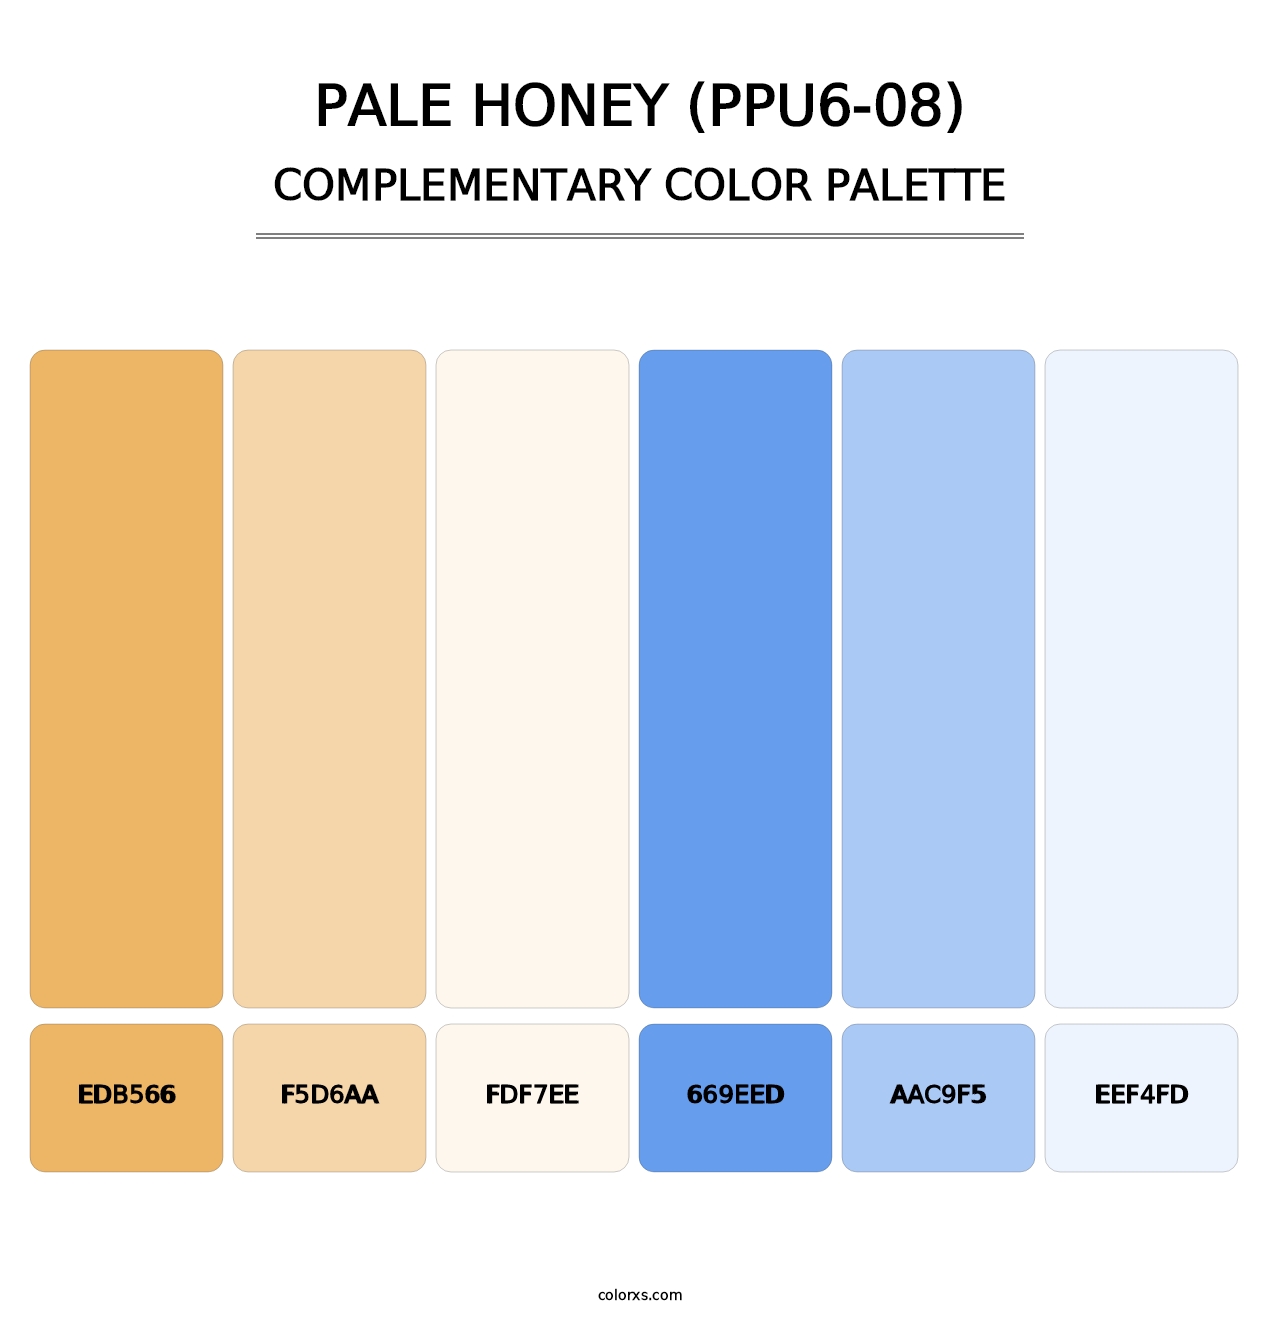 Pale Honey (PPU6-08) - Complementary Color Palette